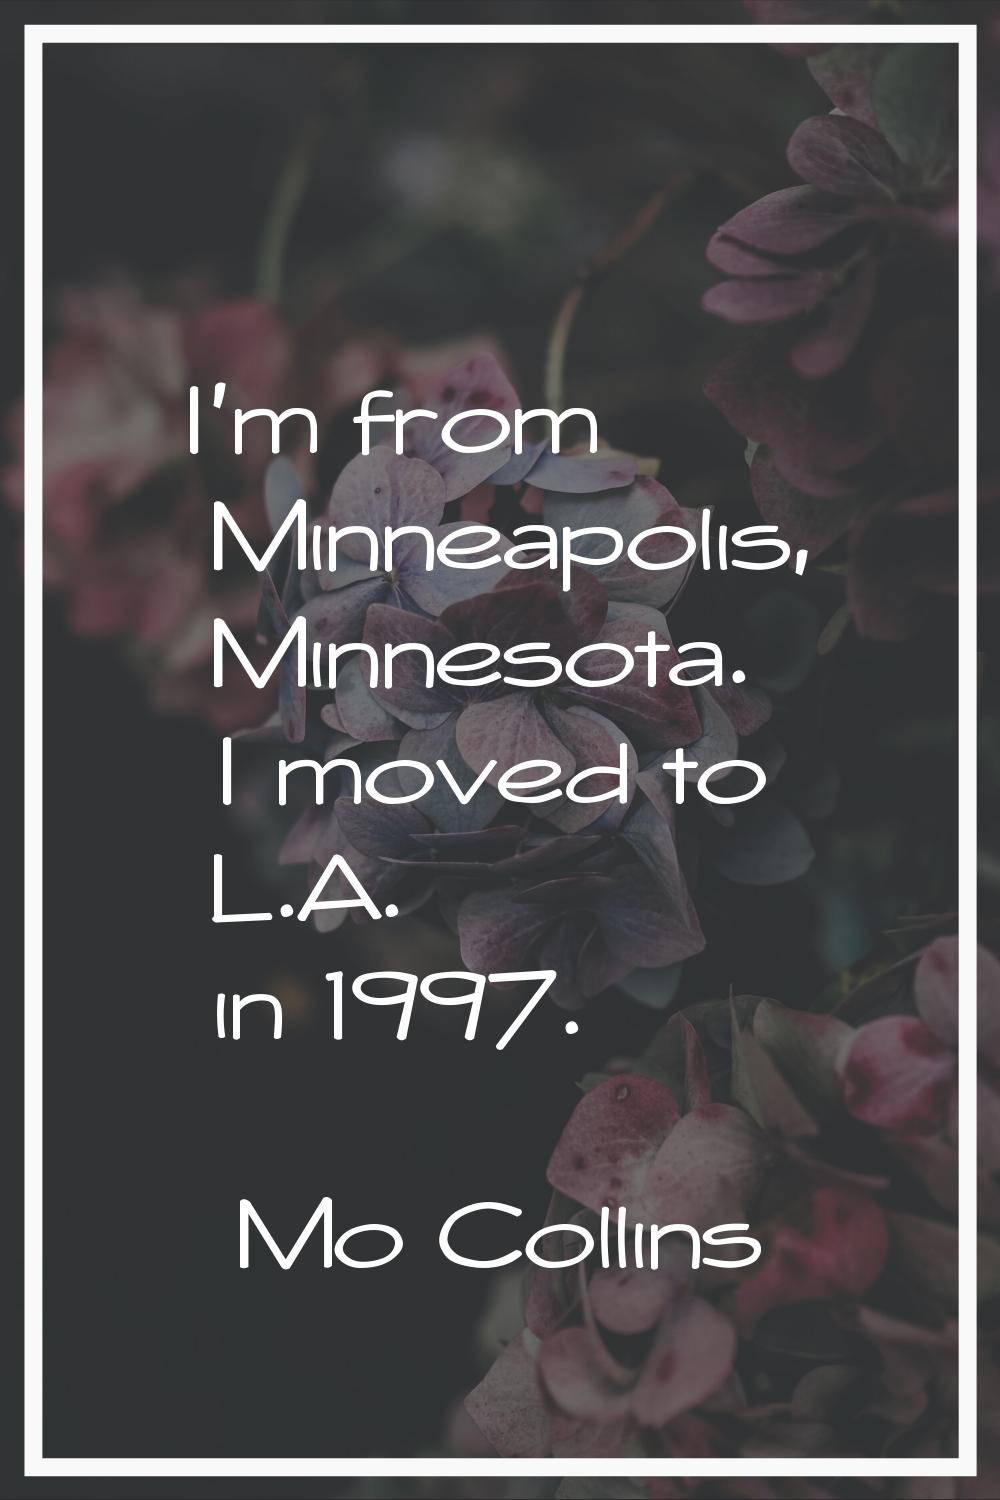 I'm from Minneapolis, Minnesota. I moved to L.A. in 1997.